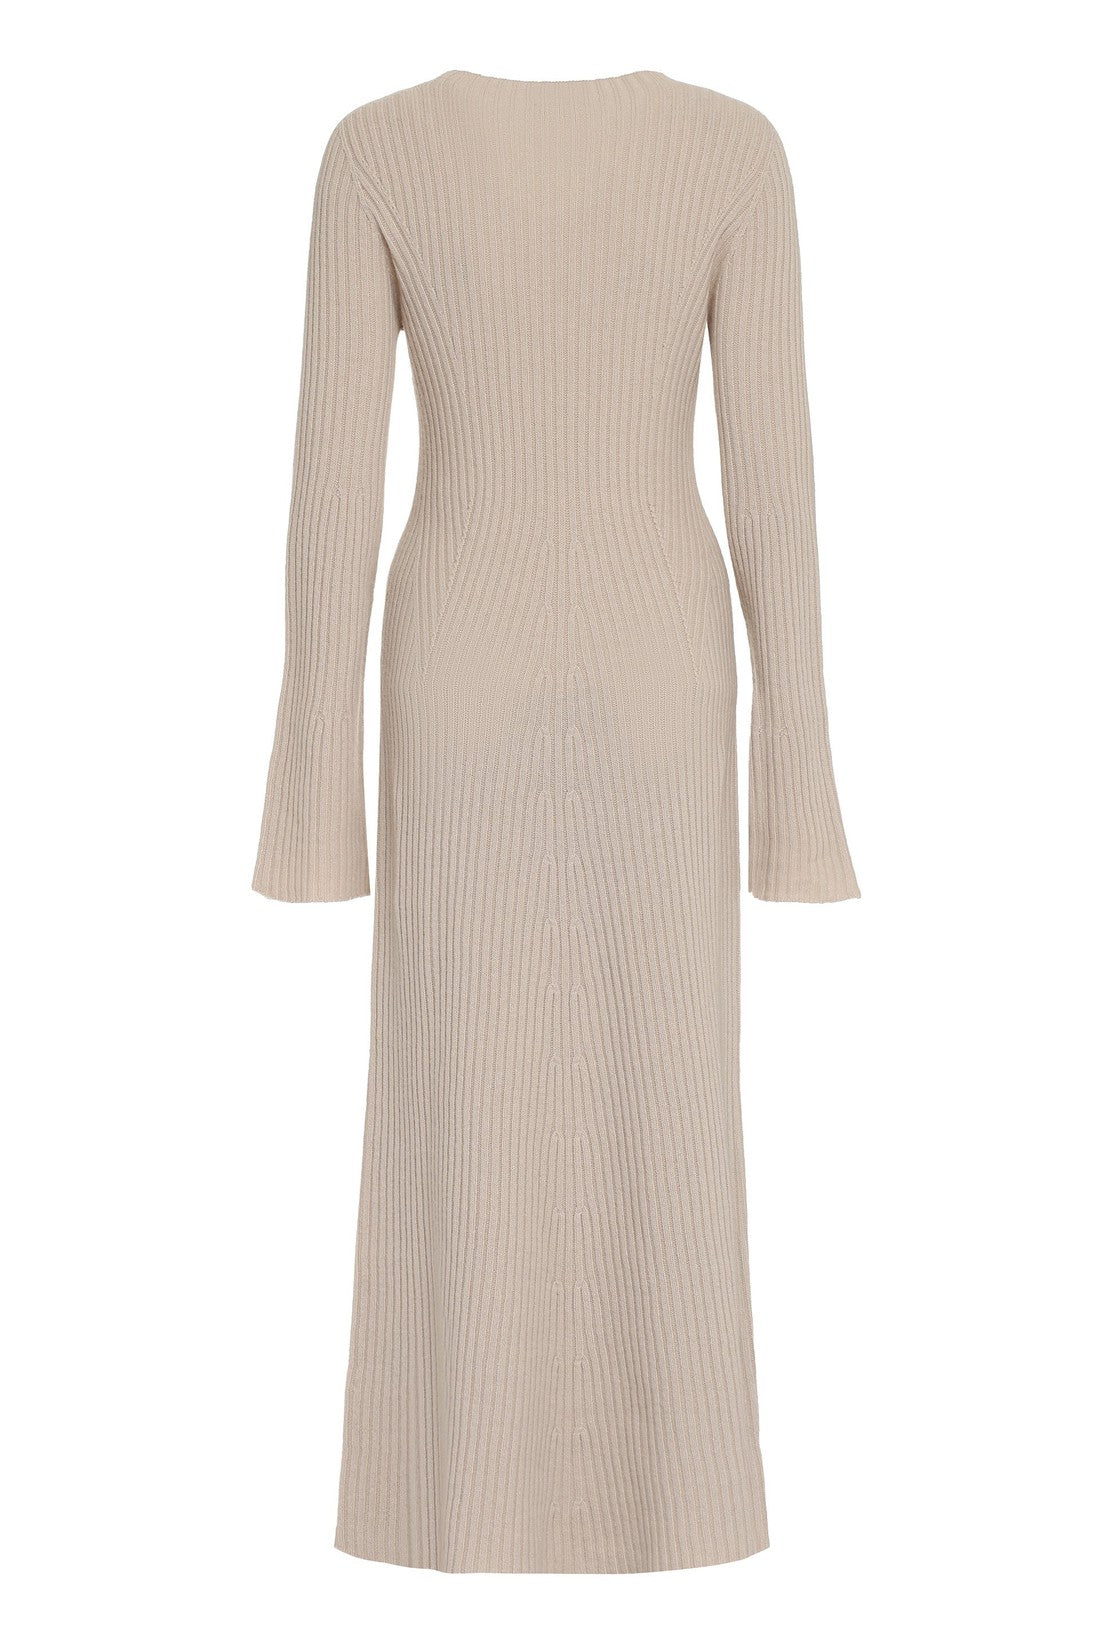 Roberto Collina-OUTLET-SALE-Knitted dress-ARCHIVIST